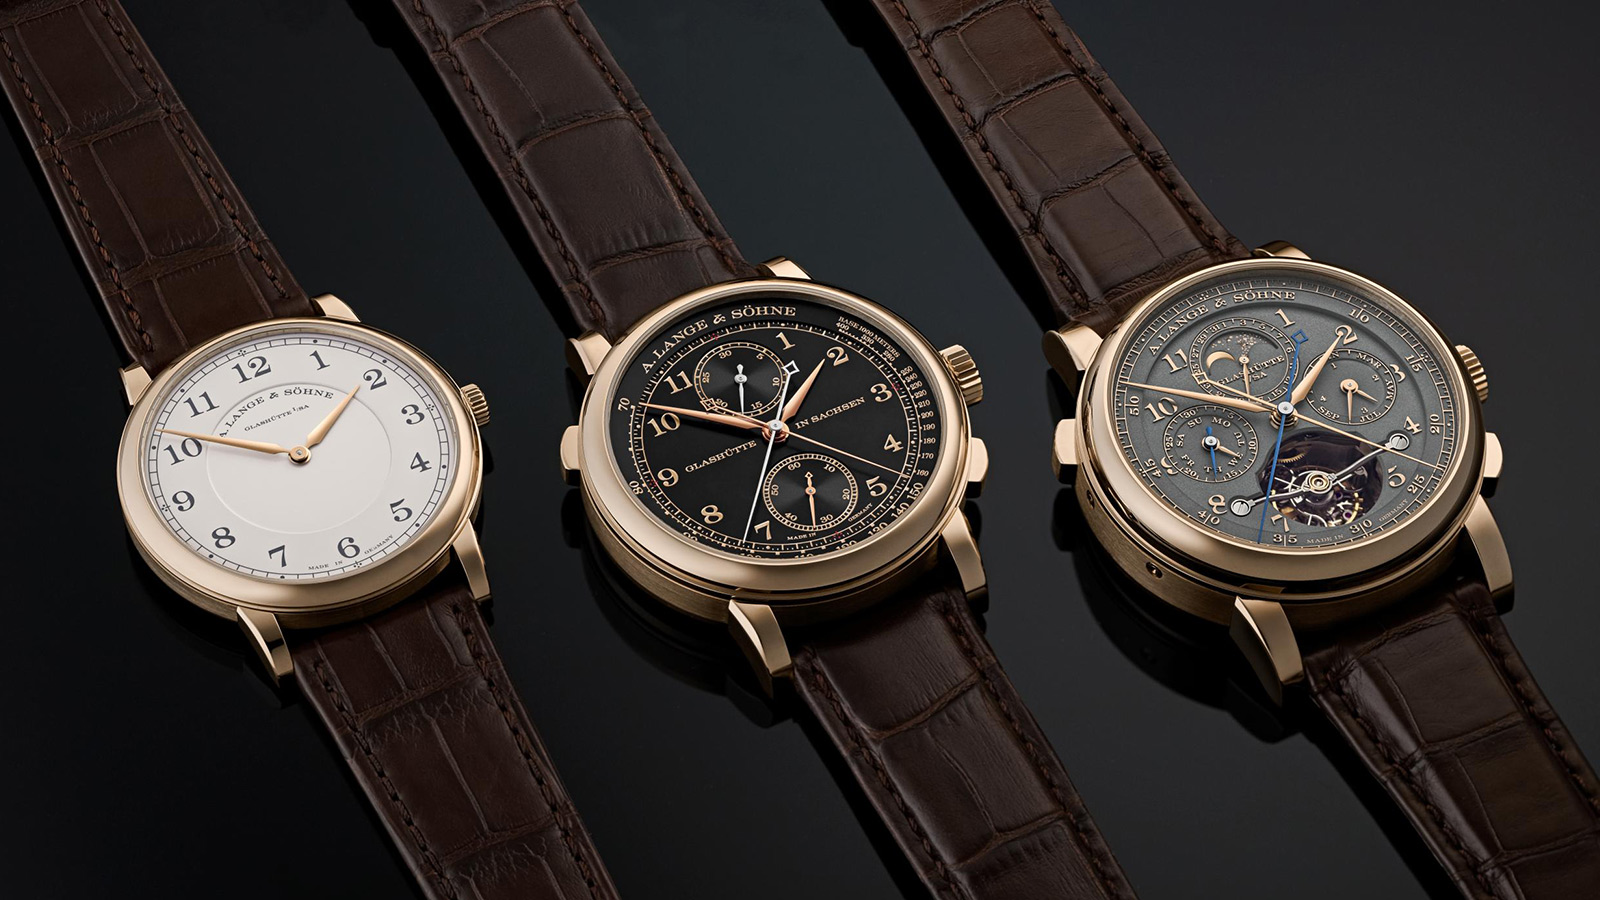 A. Lange & Söhne Homage to F.A. Lange Collection